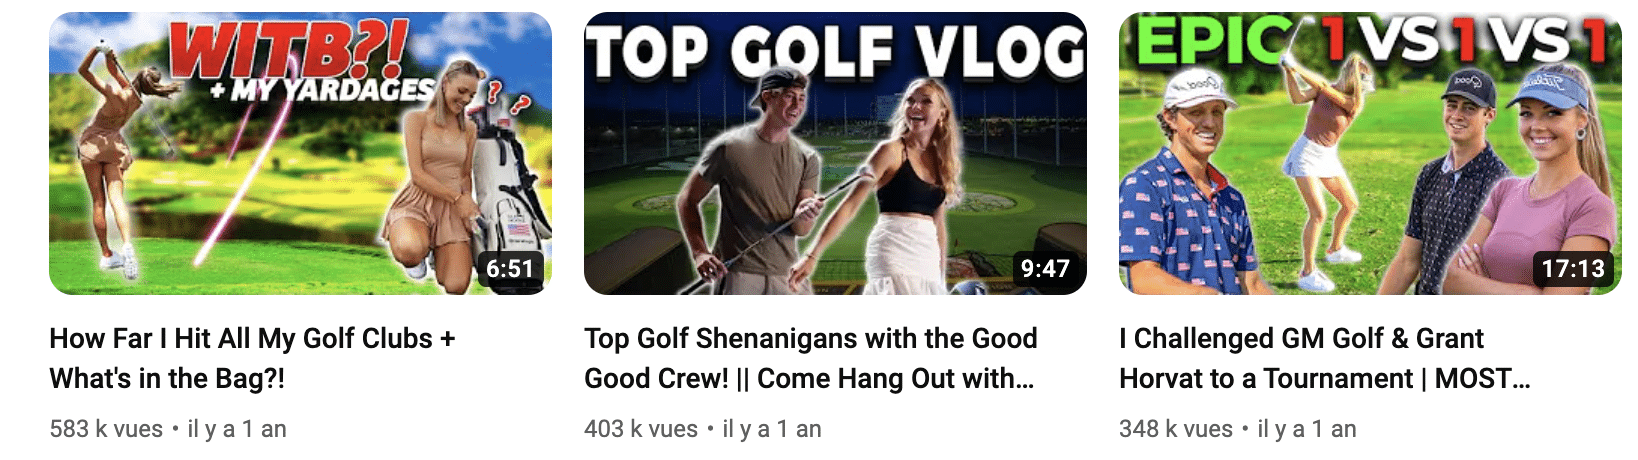 Screenshot of top youtube videos of golf influencer, Claire Hogle.